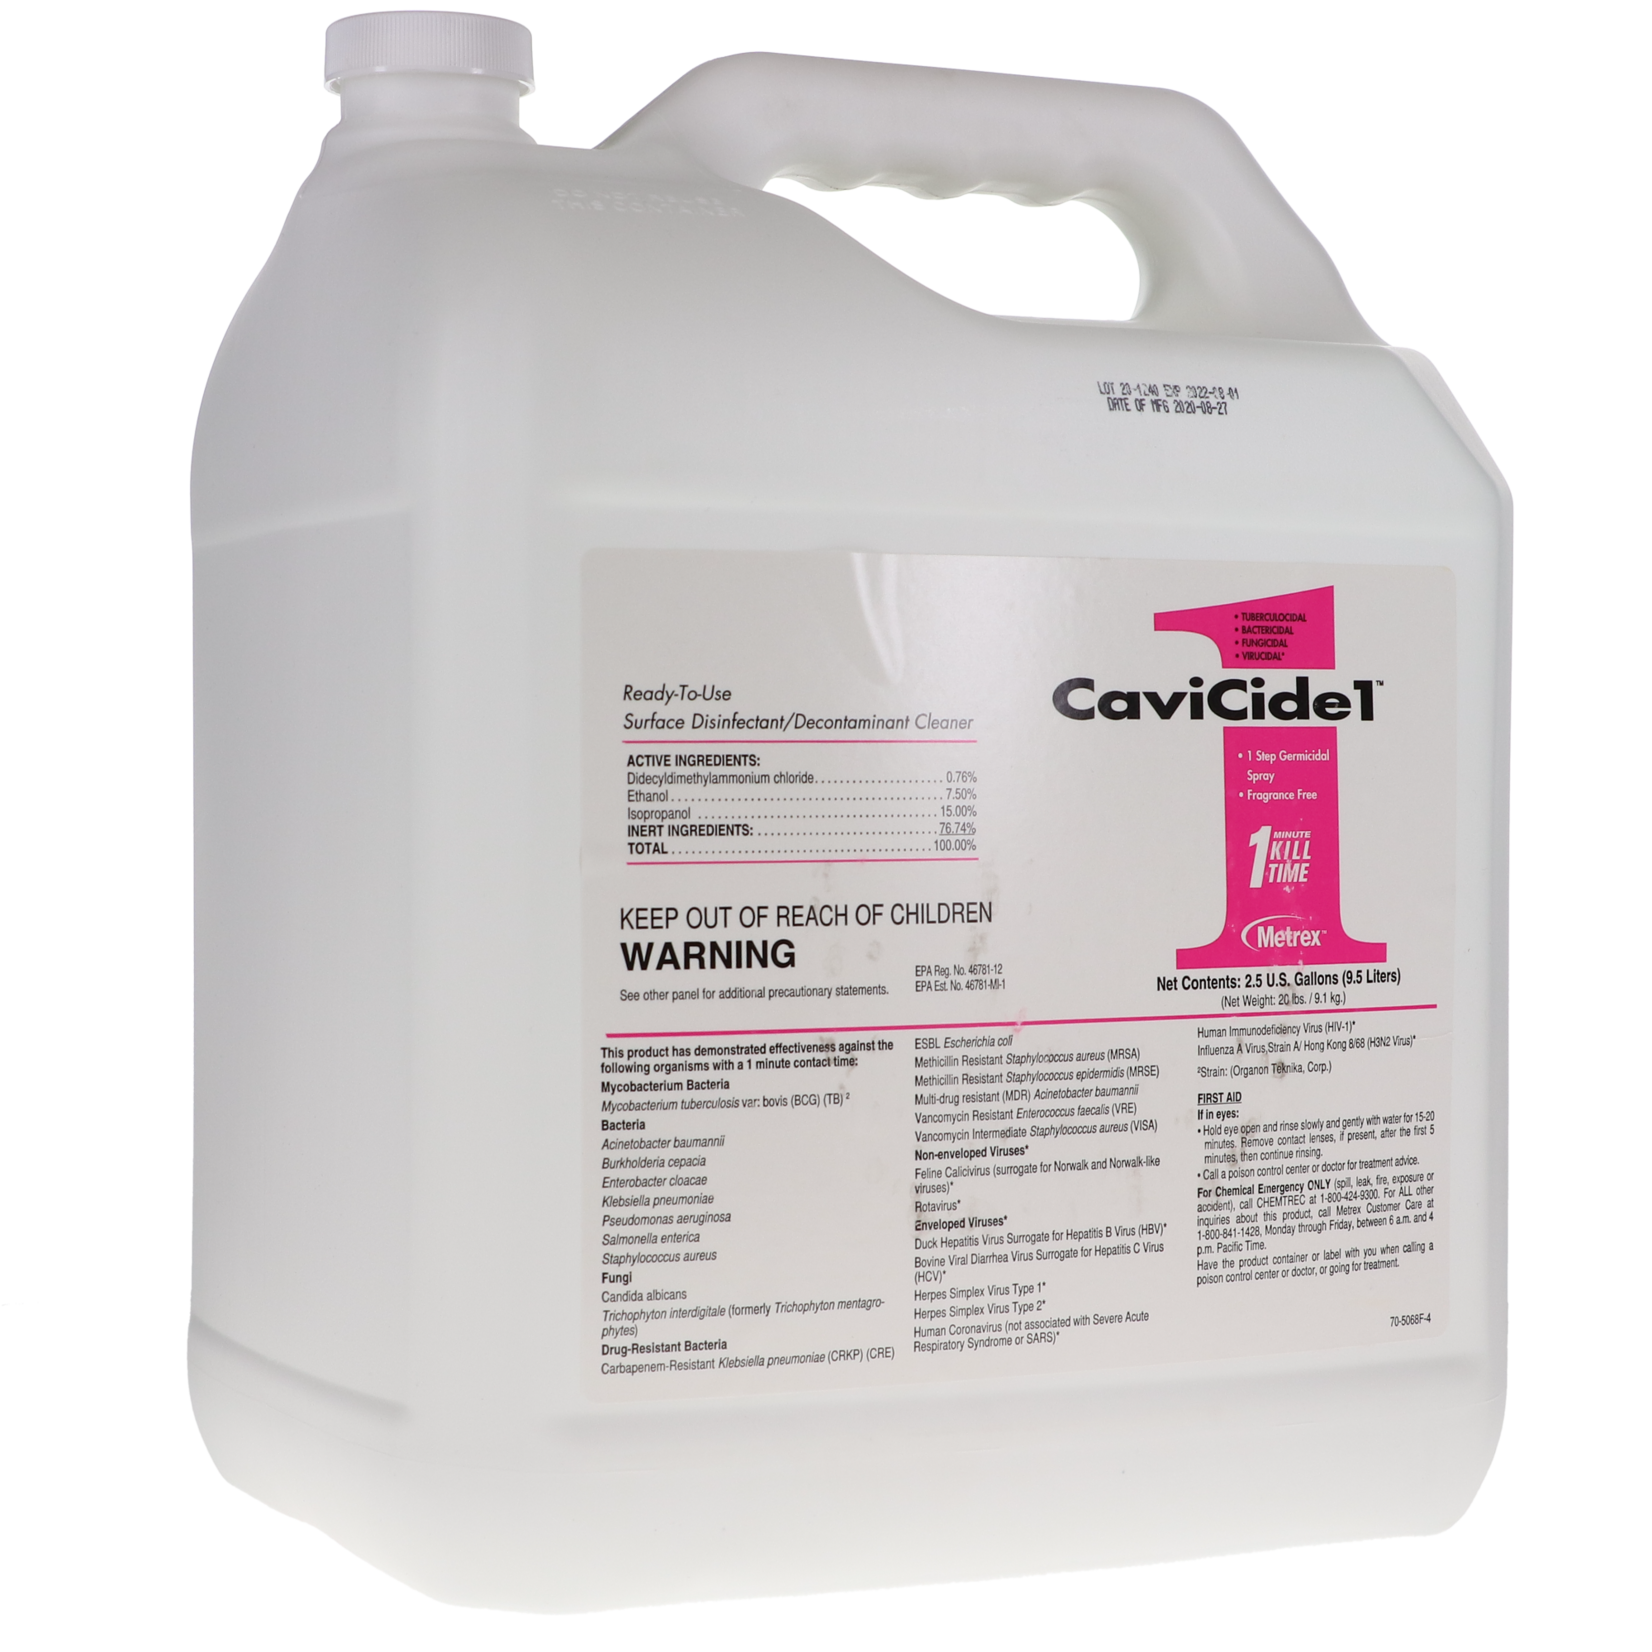 CAVICIDE SURFACE DISINFECTANT - 1 MINUTE KILL 2.5 GALLONS